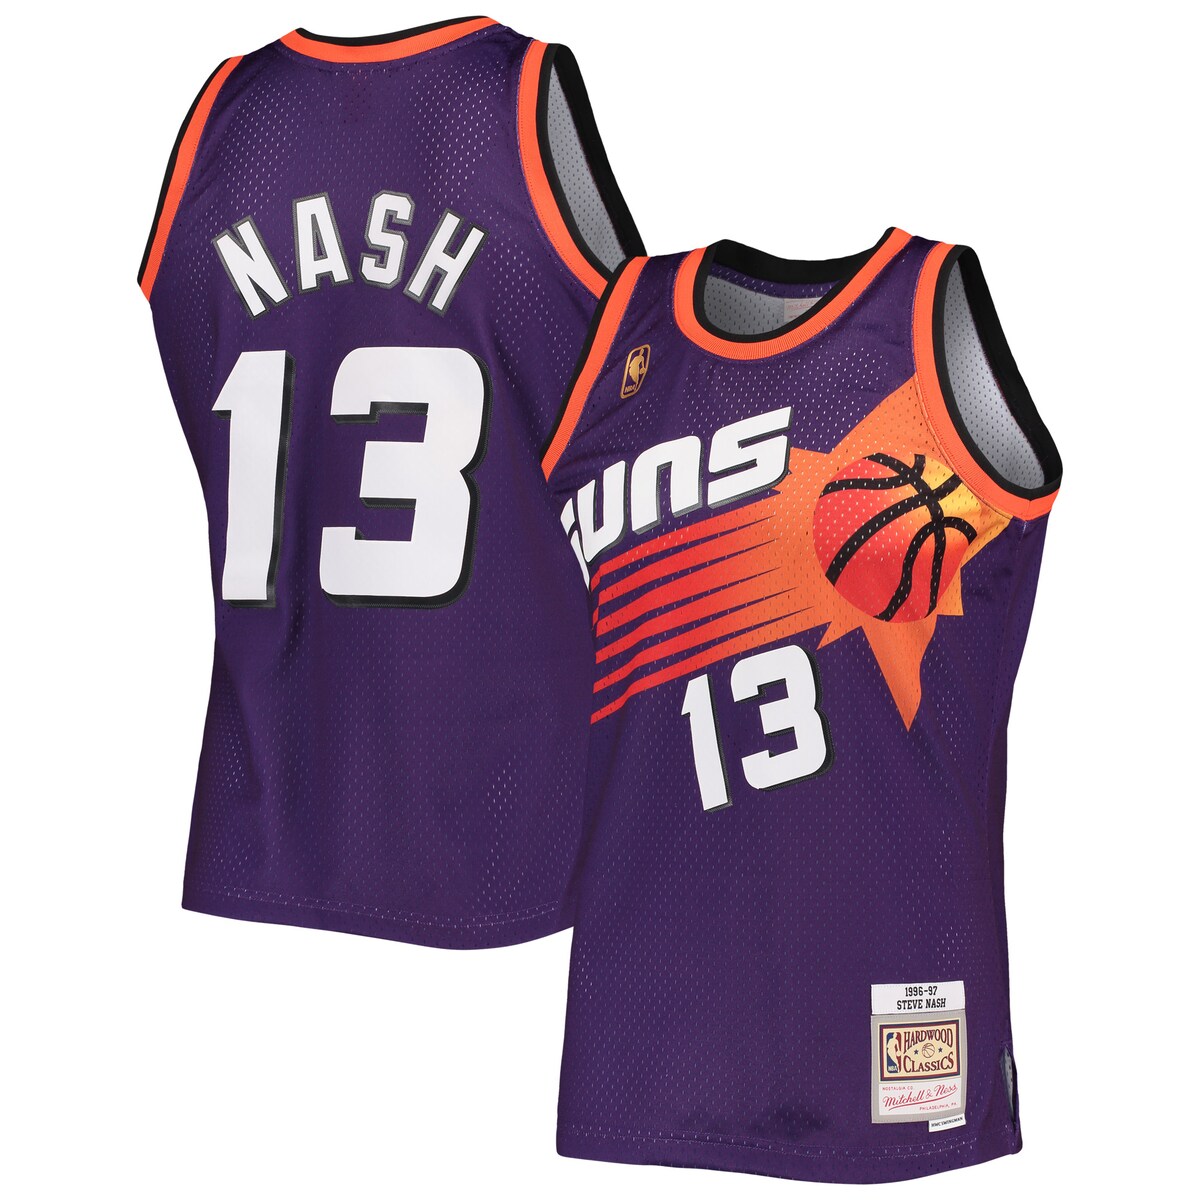 Think back to the good old days when Steve Nash was helping the Phoenix Suns to victory by grabbing this Swingman Jersey. Mitchell & Ness designed this piece with mesh fabric for breathability and freshness. On top of that, the throwback-inspired Phoenix Suns and Steve Nash graphics adds nostalgia to your spirited apparel.Machine wash, line dryOfficially licensedSublimated graphicsBrand: Mitchell & NessSide splits at waist hemMaterial: 100% PolyesterMesh fabricSleevelessImportedWoven jock tagHeat-sealed tackle twill graphicsThrowback JerseyCrew neck